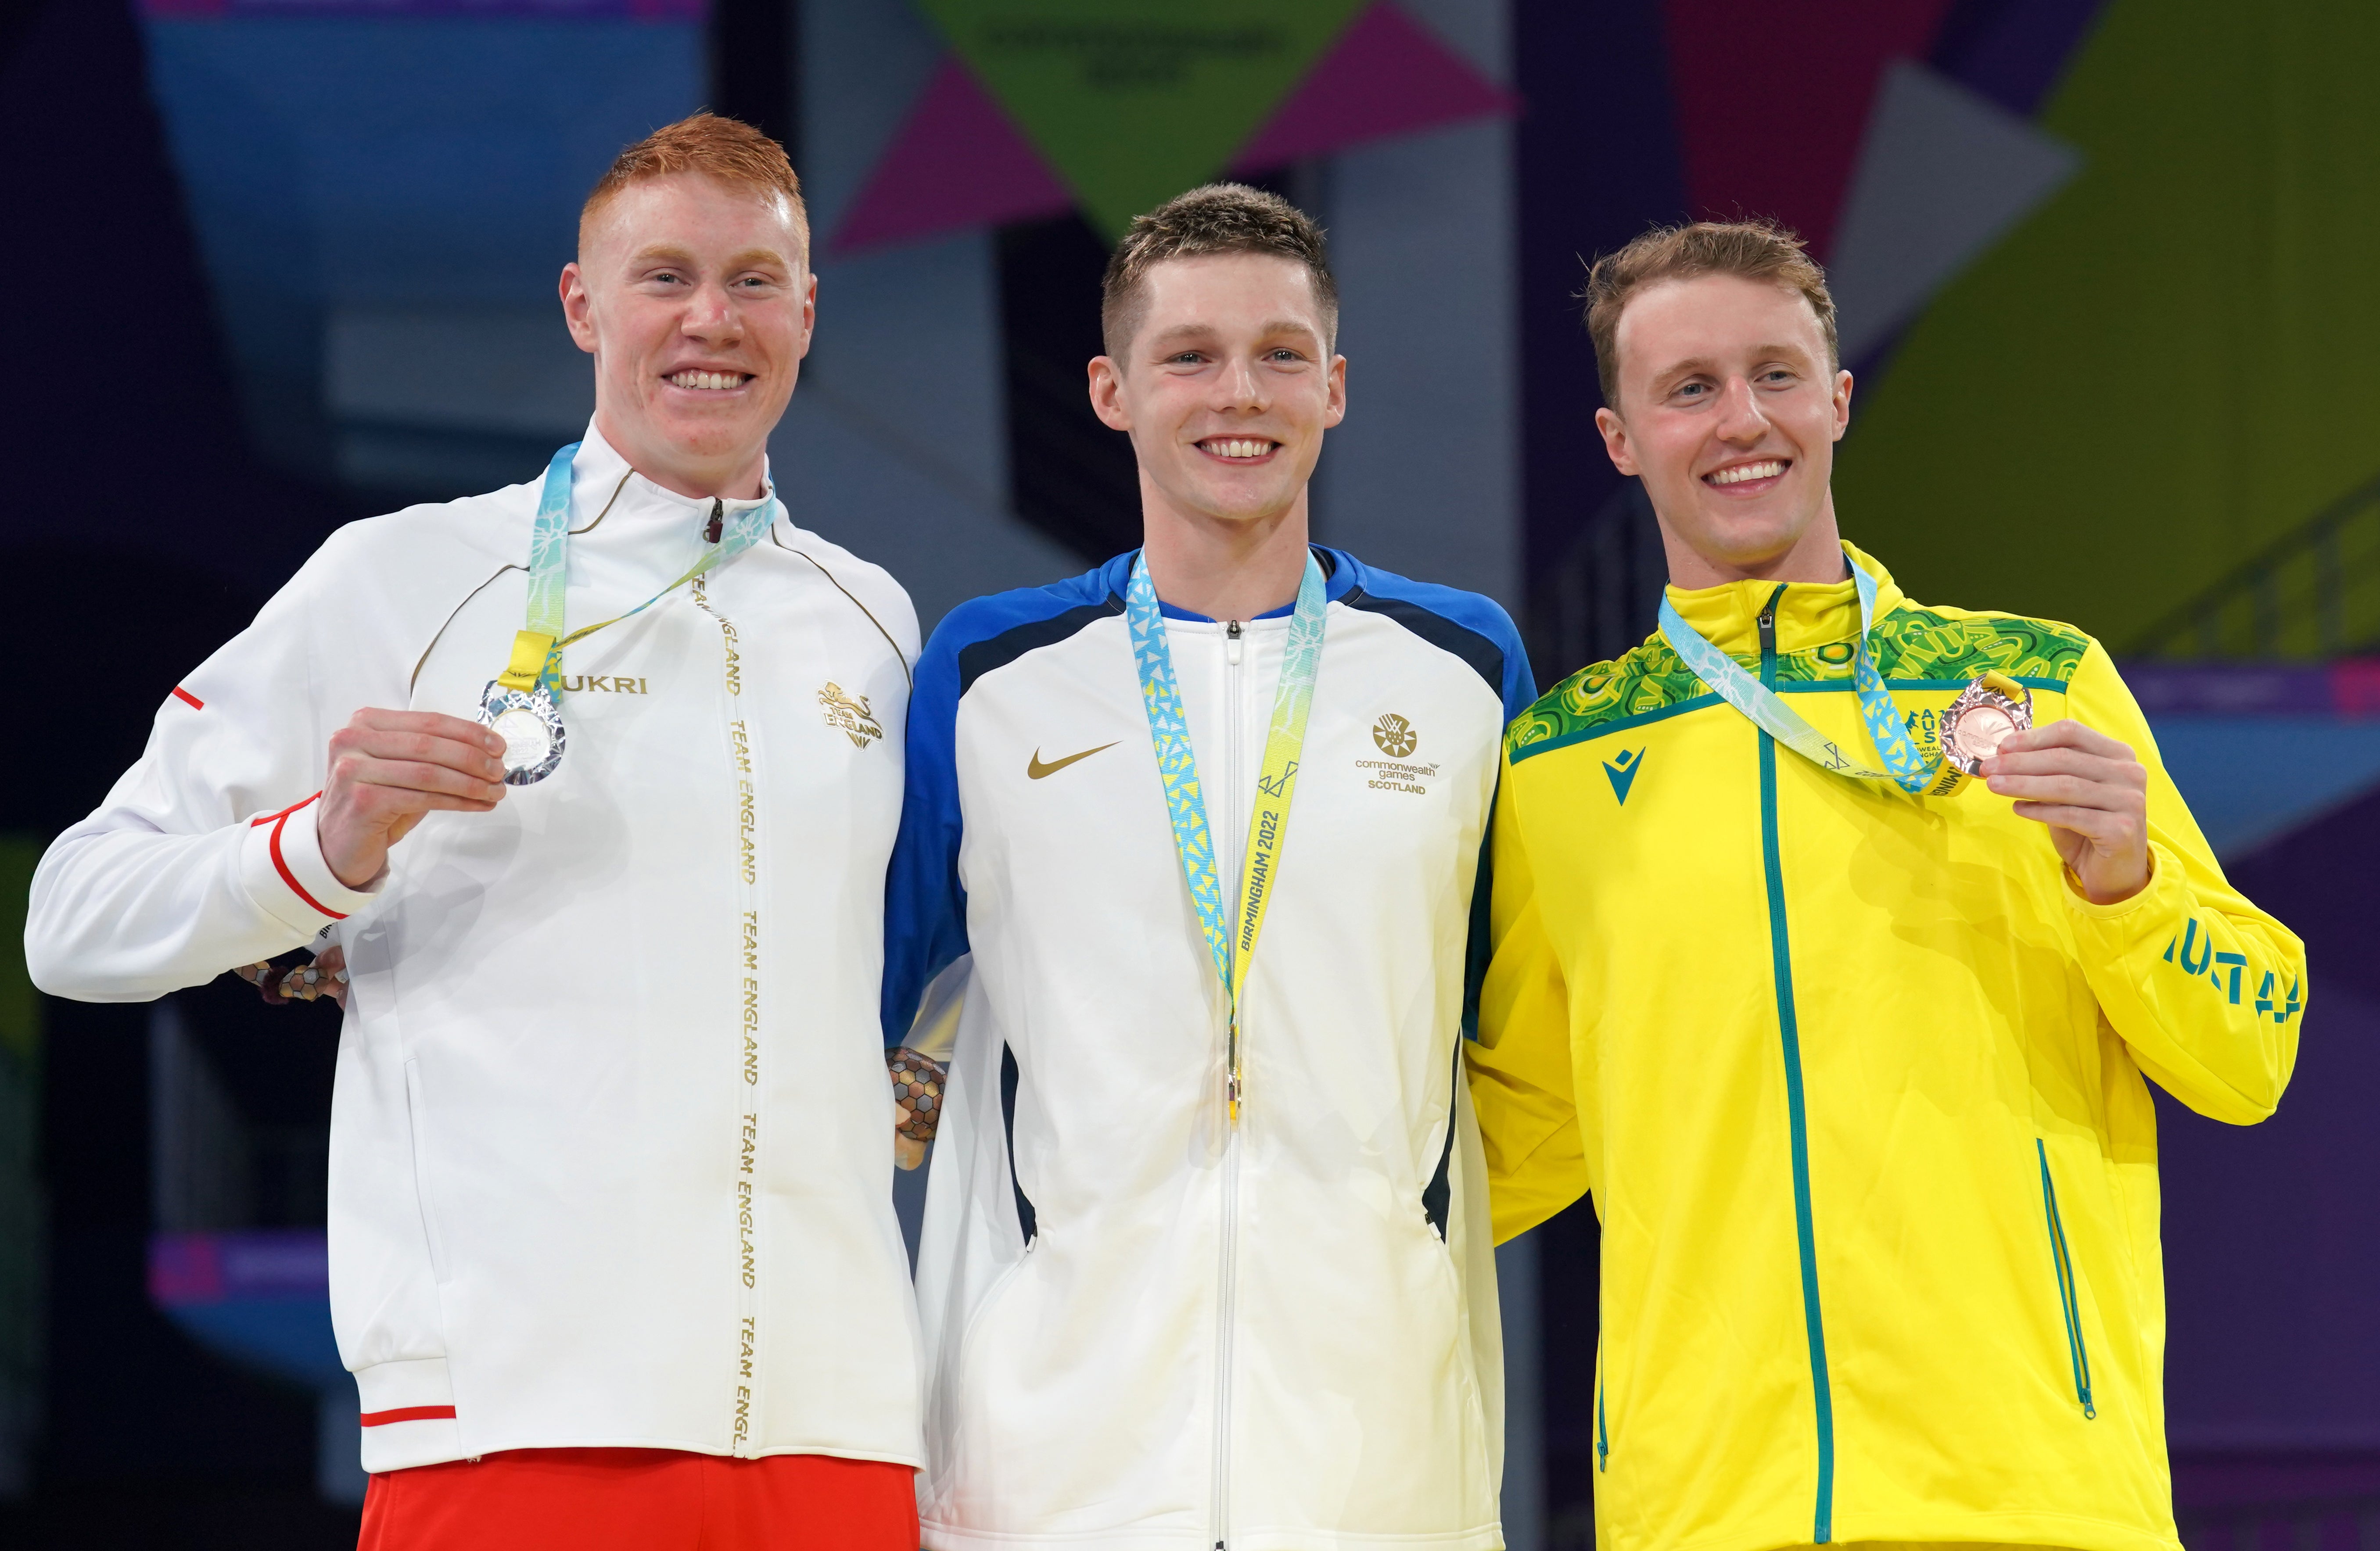 Duncan Scott, centre, claimed gold in the men’s 200m freestyle with victory over Tom Dean, left (David Davies/PA)